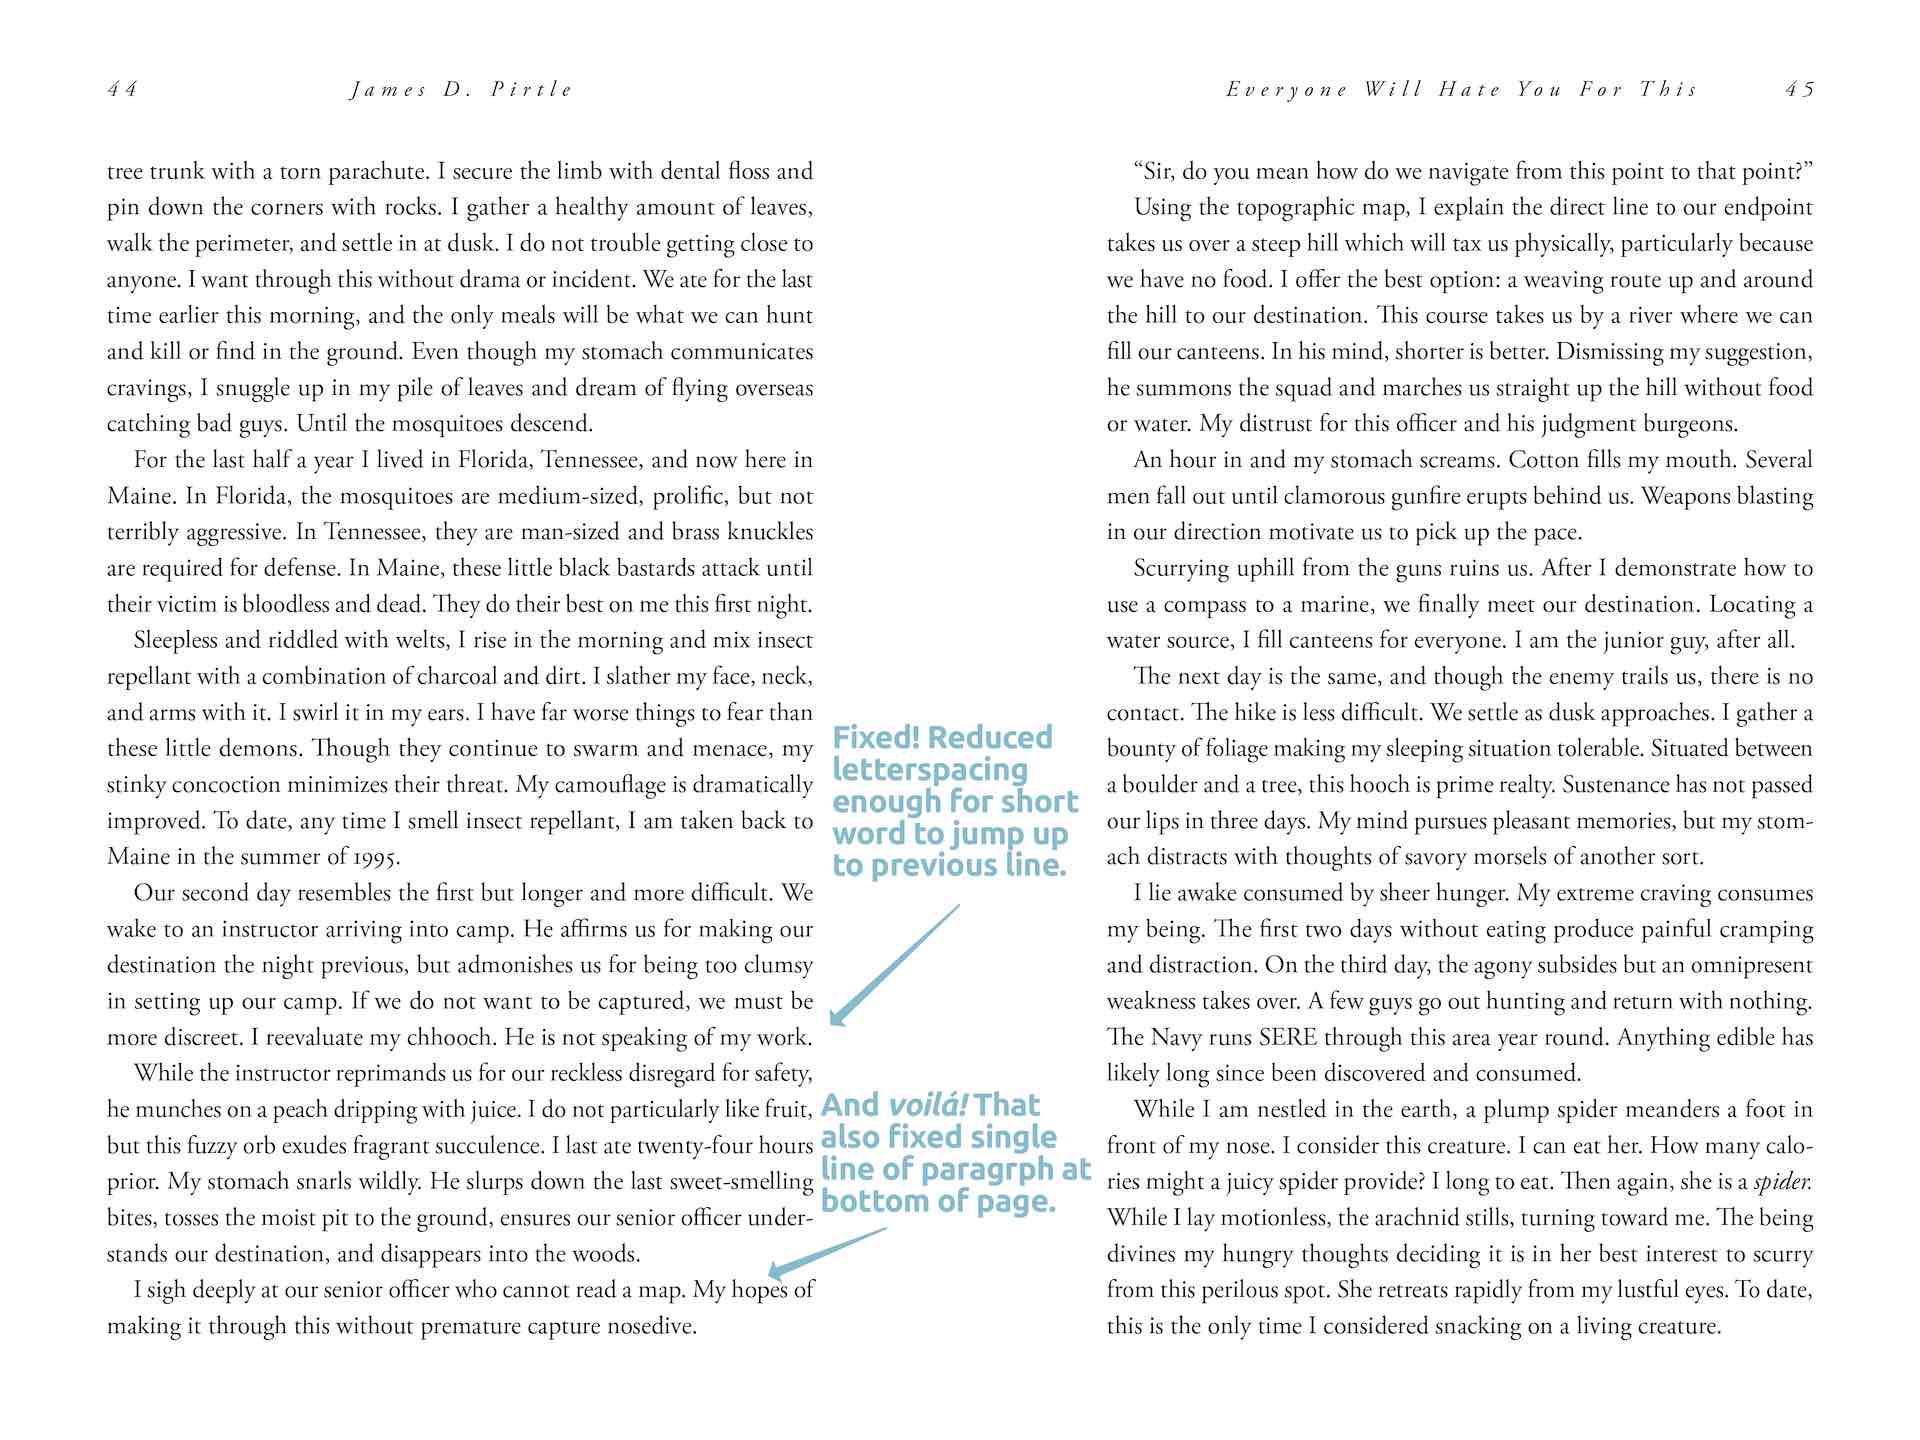 how book designer can fix widow orphan runt by adjusting letterspacing